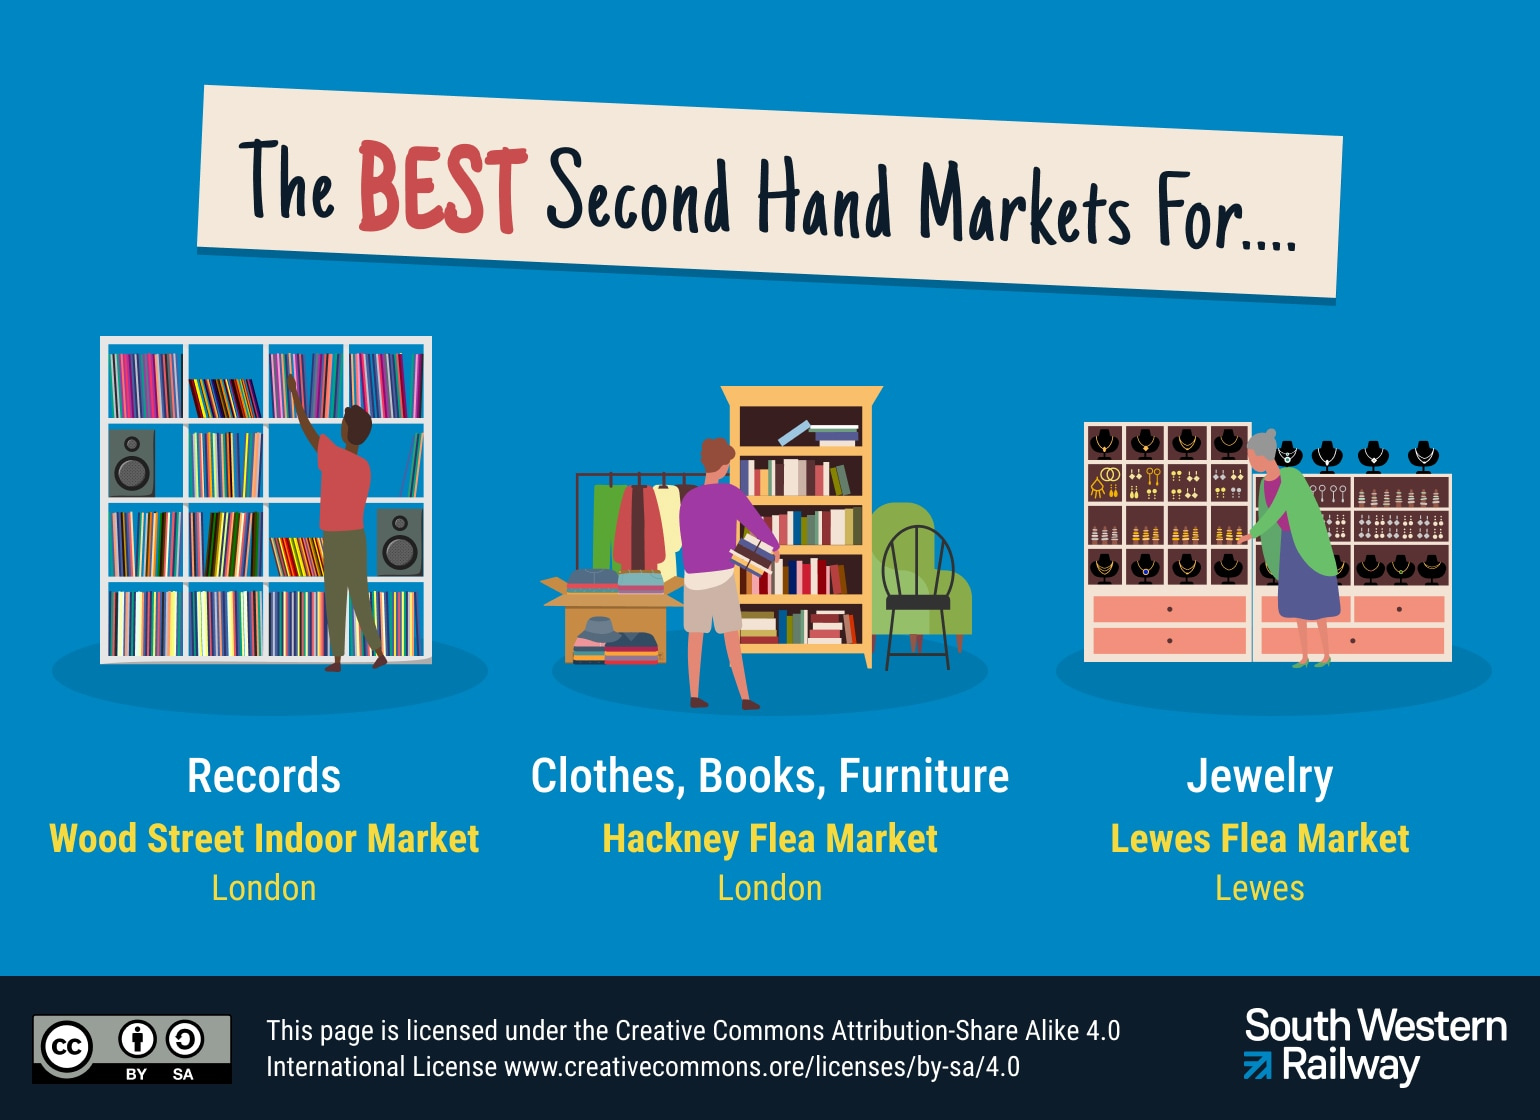 The best second hand markets for...illustration